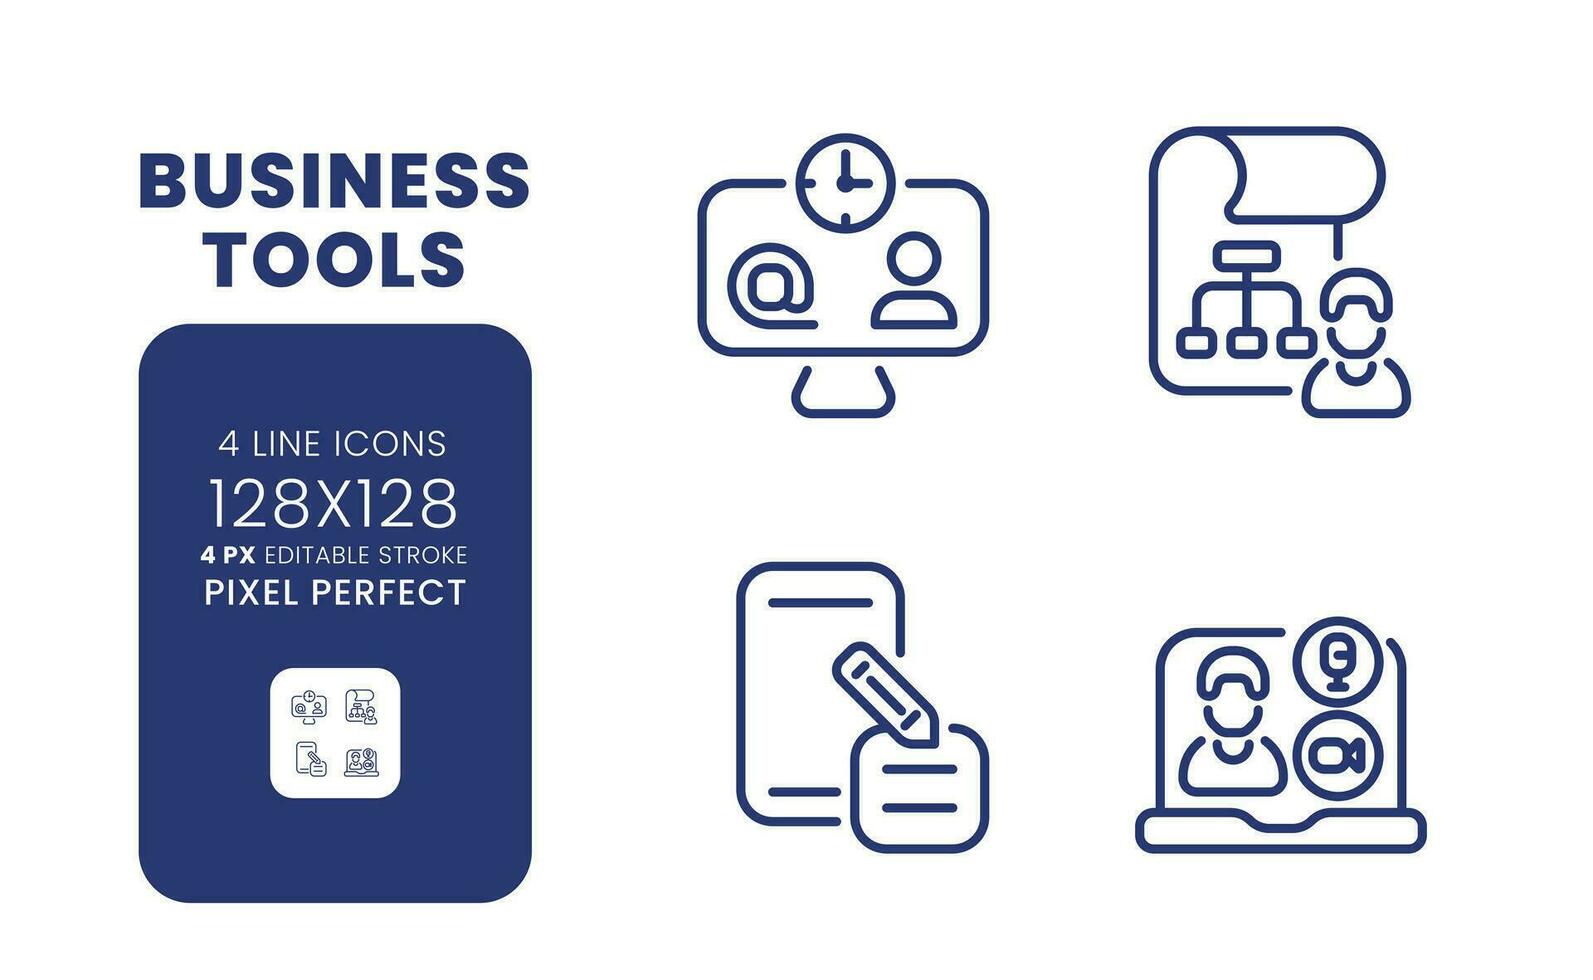 Business tools linear desktop icons set. Productivity software. Operations management. Pixel perfect 128x128, outline 4px. Isolated user interface elements pack for website. Editable stroke vector